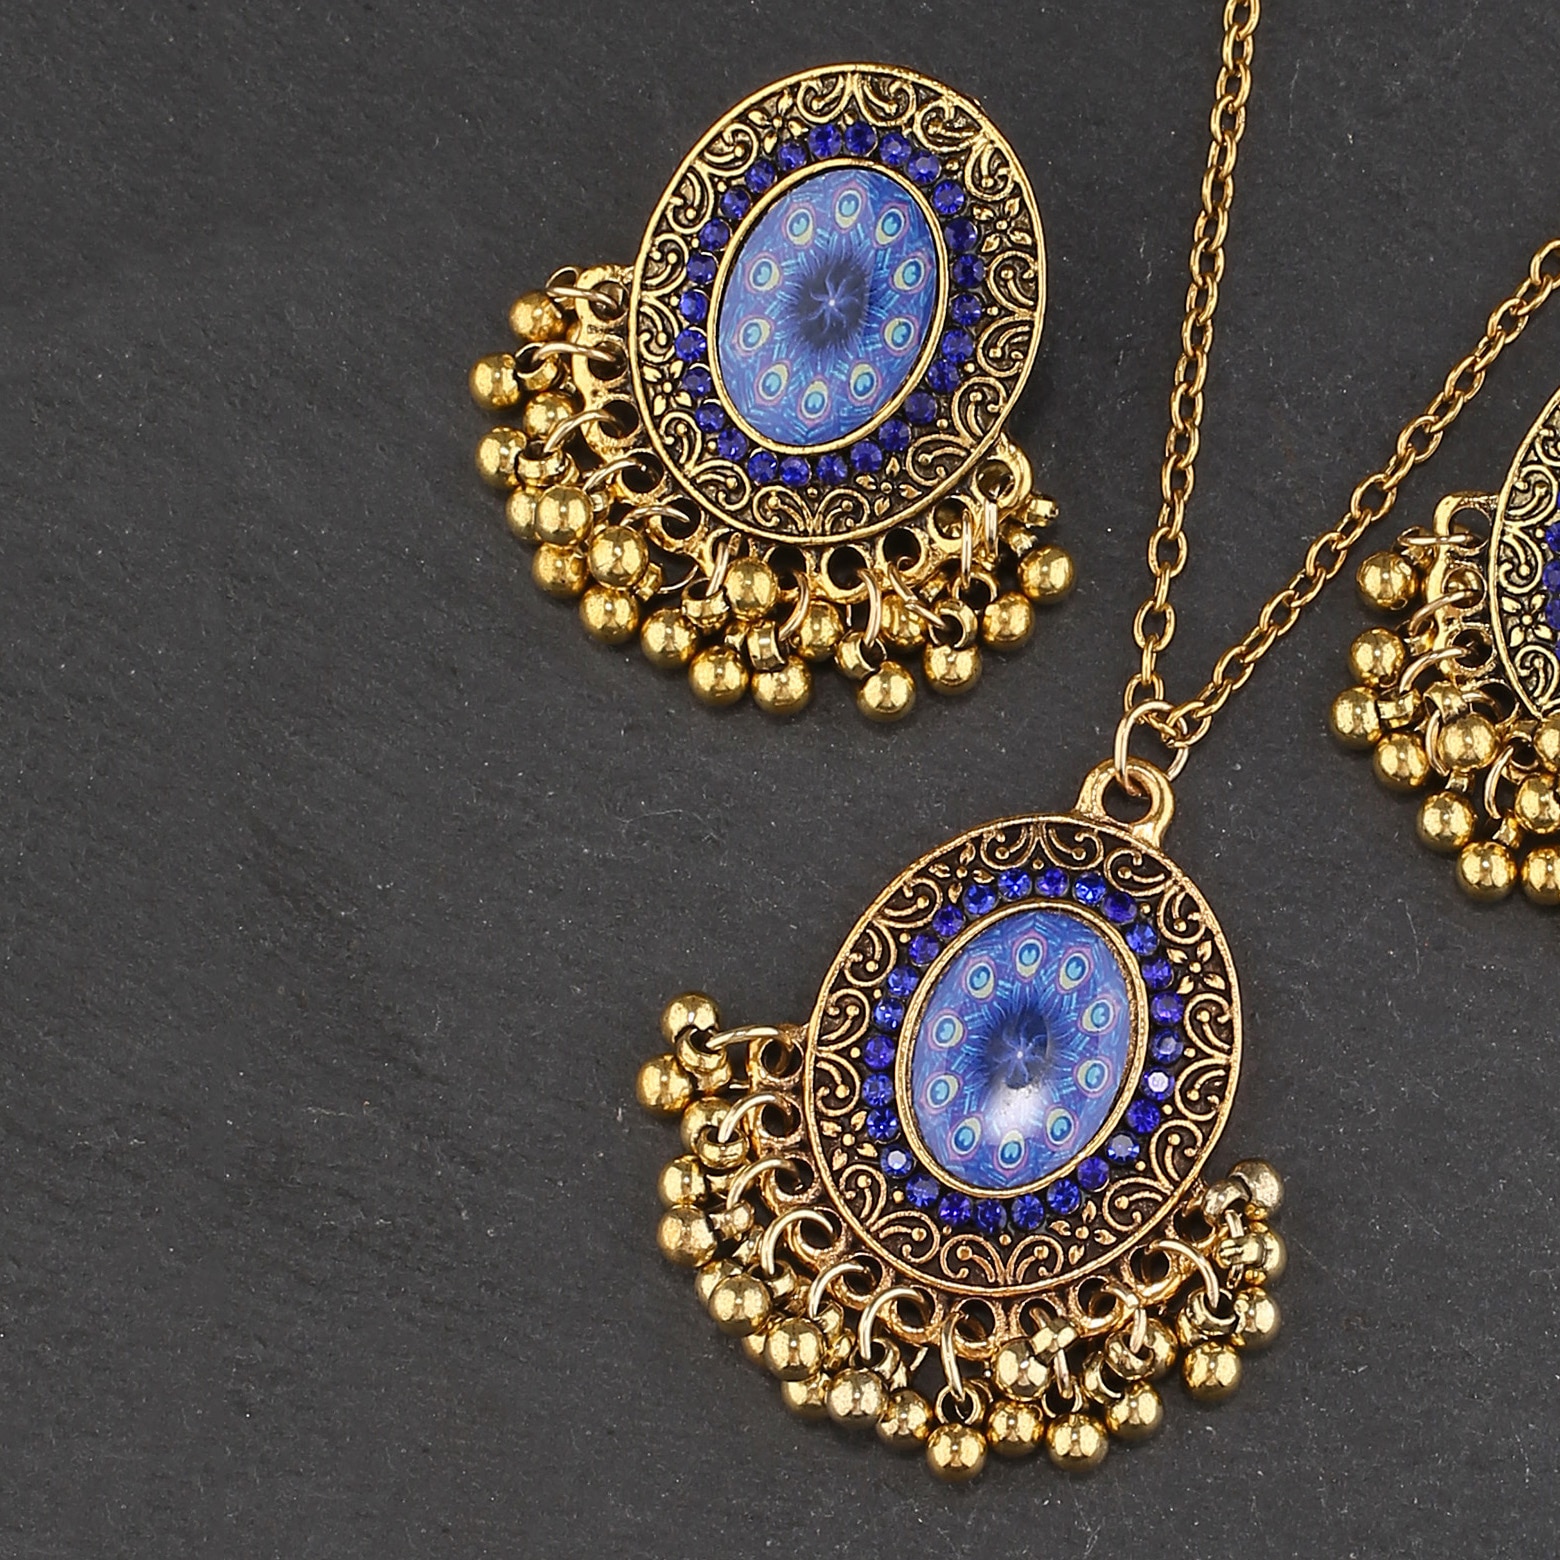 Afghan-Vintage-Tribal-Blue-Flower-Statement-Necklace-Earring-Jewelry-Sets-Gold-Color-Indian-Chain-Ne-3256804350070961-3